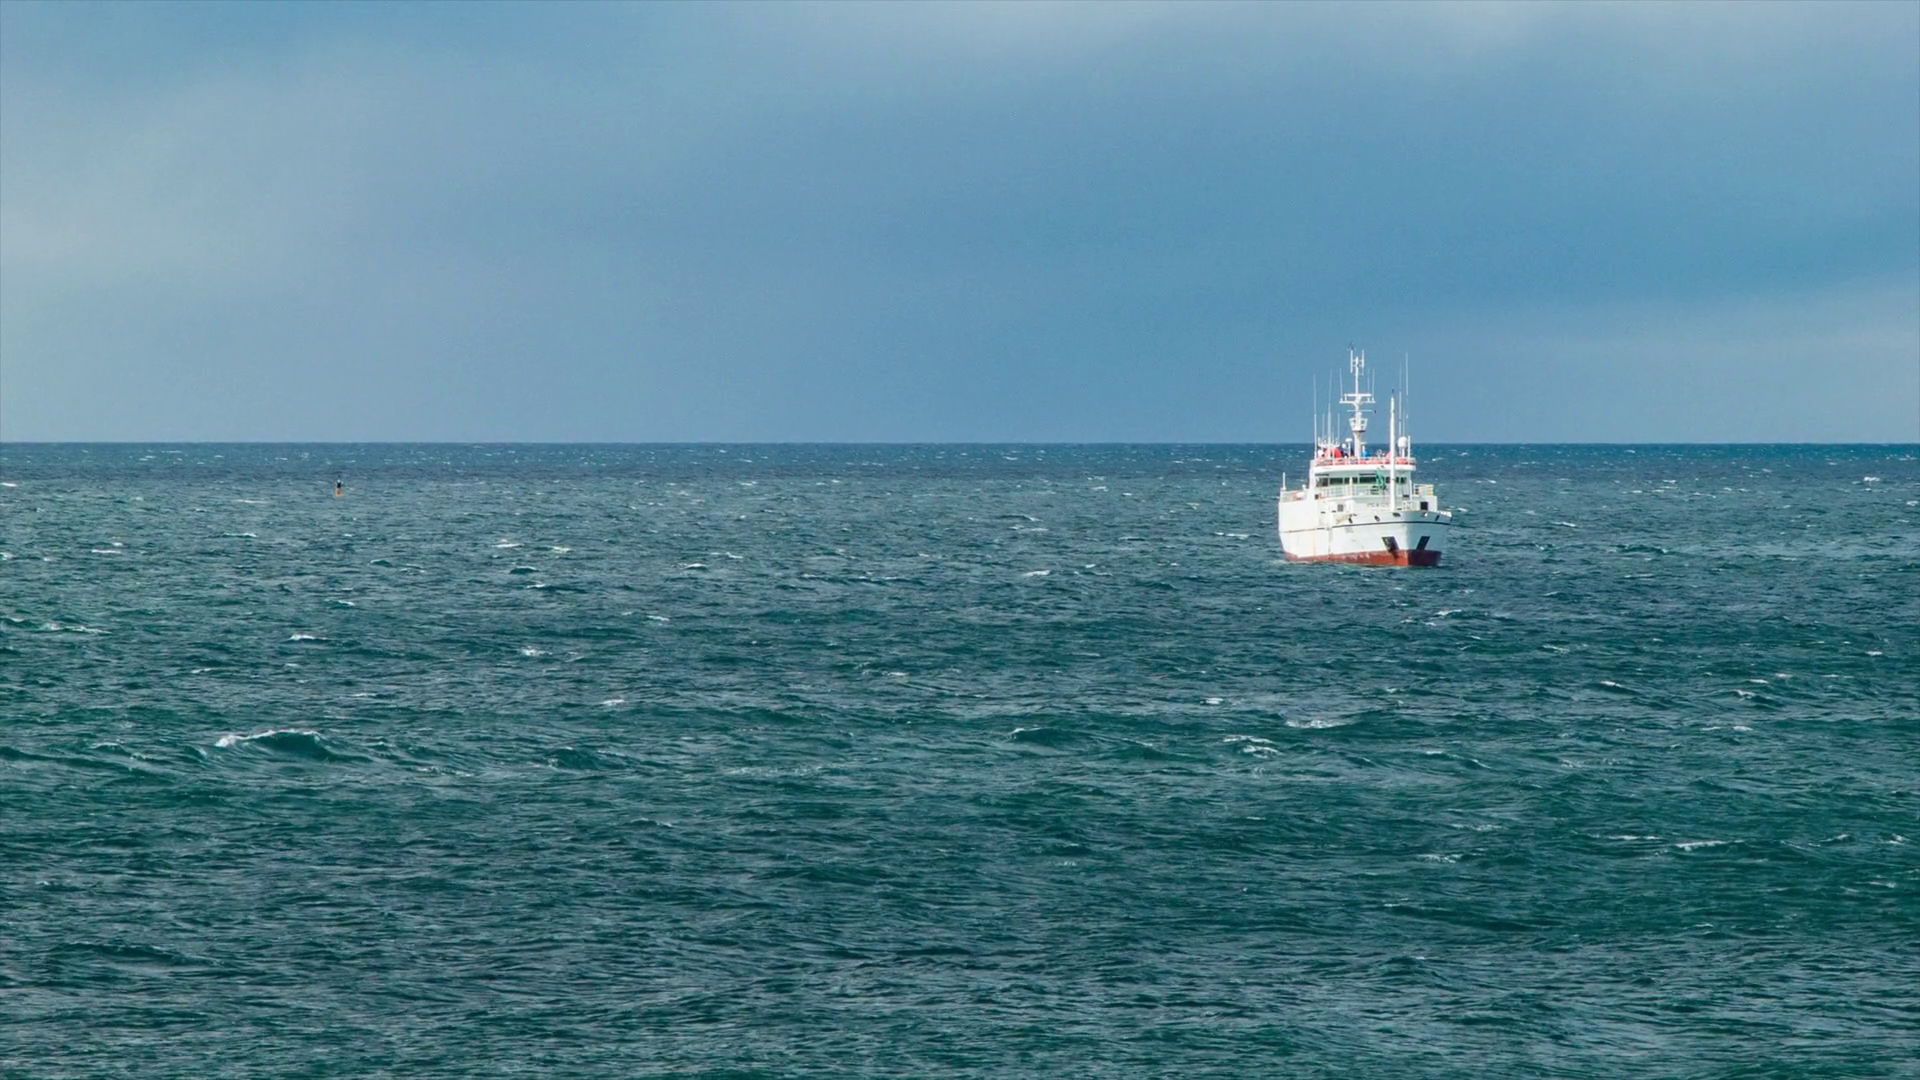 Fishing Boat Alone in the Pacific Ocean near Punta Arenas Chile in ...